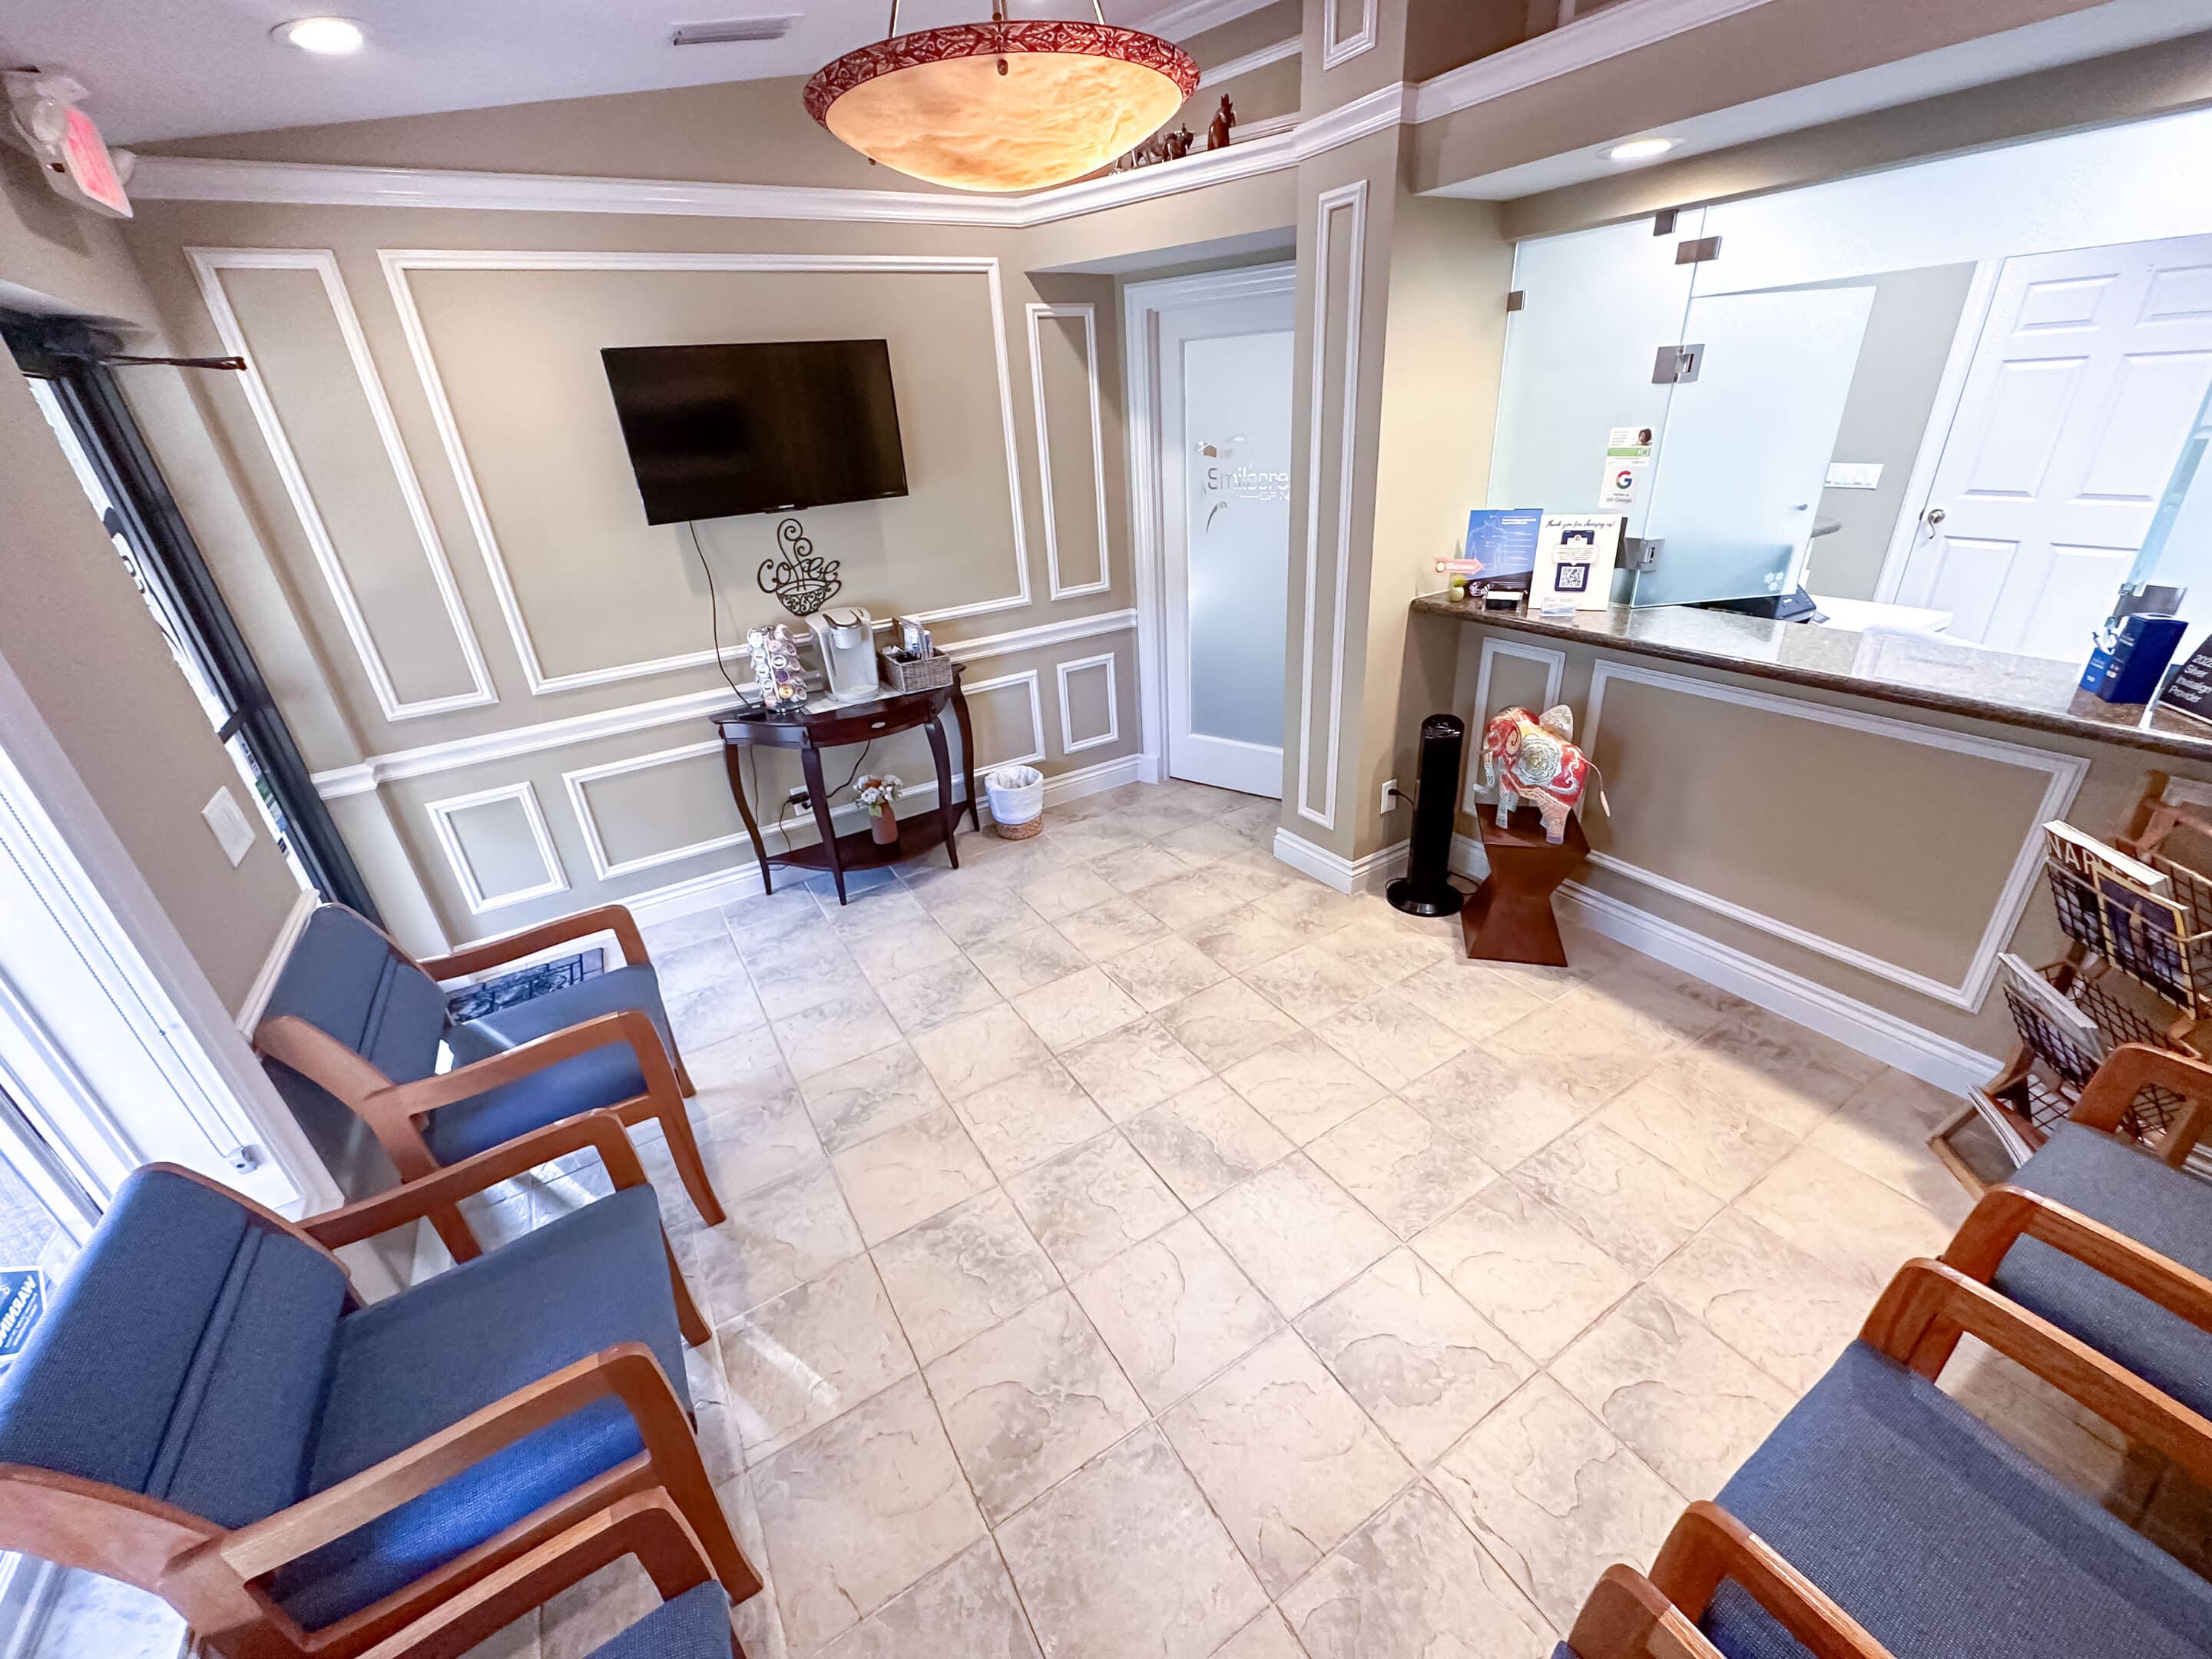 A view of the waiting room at Smilecreator's Naples location. Several cushioned chairs are arranged neatly, with a television and the front desk visible.